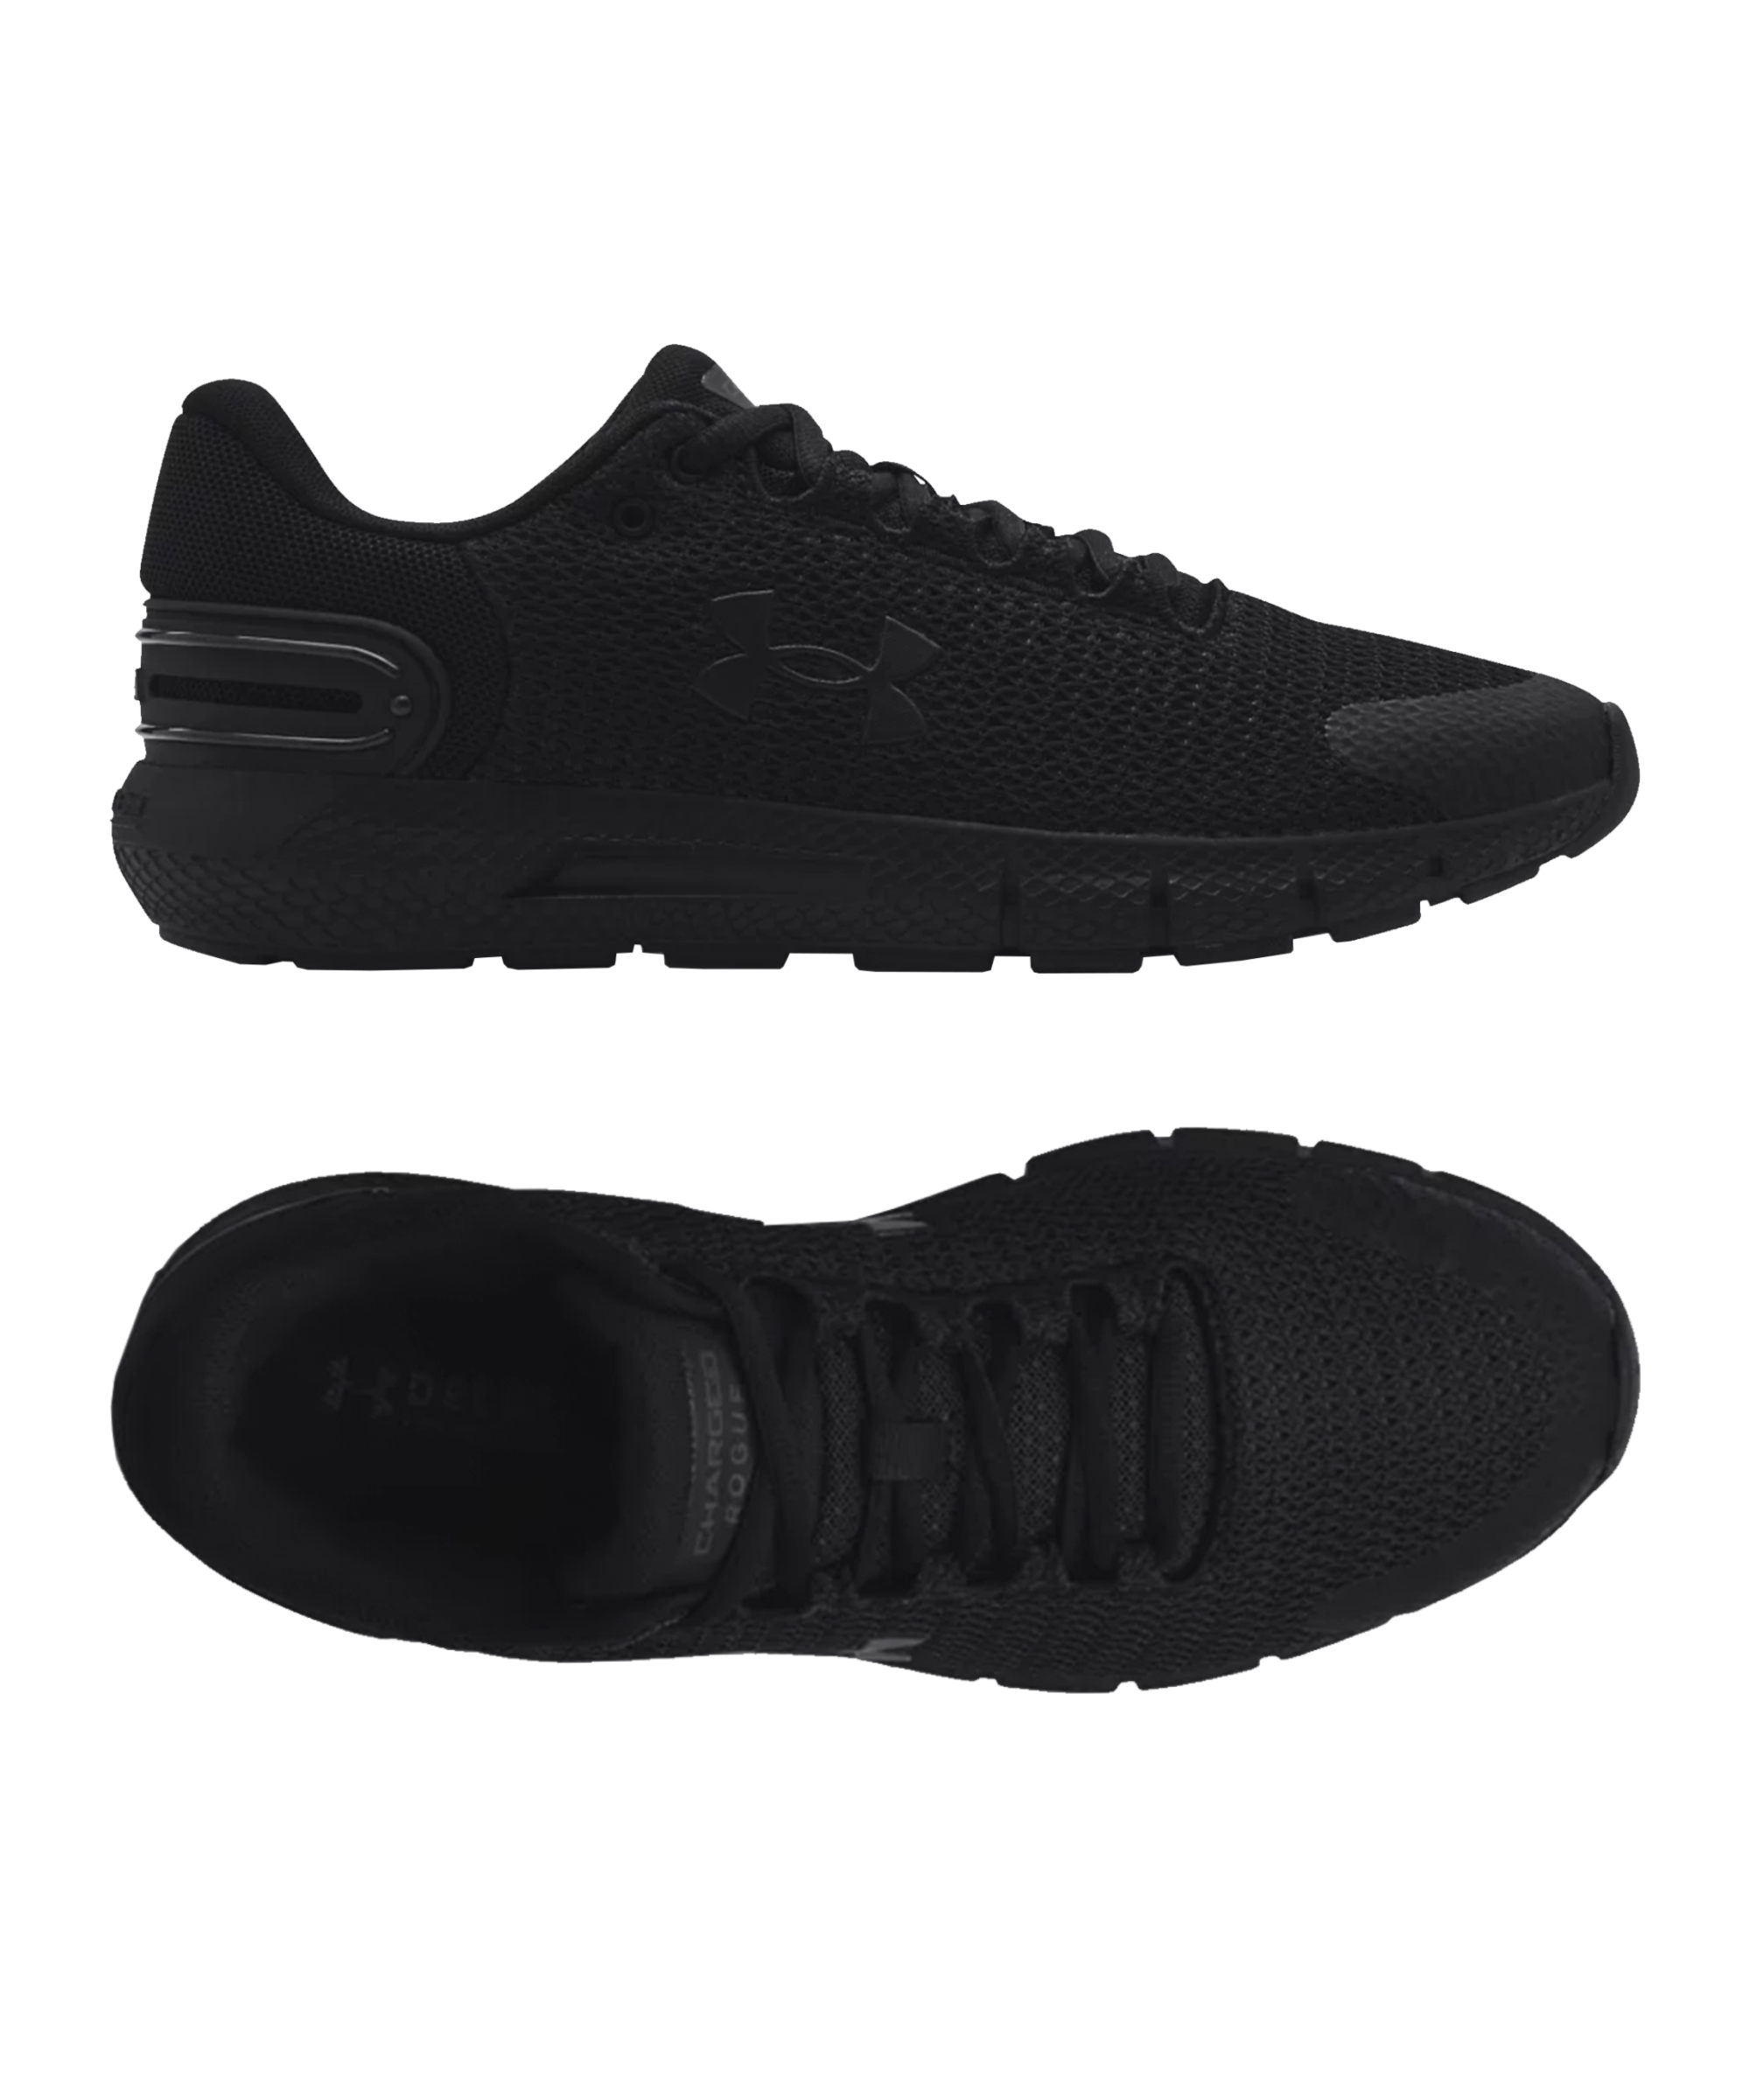 Under Armour Charged Rogue 2.5 Running - Black